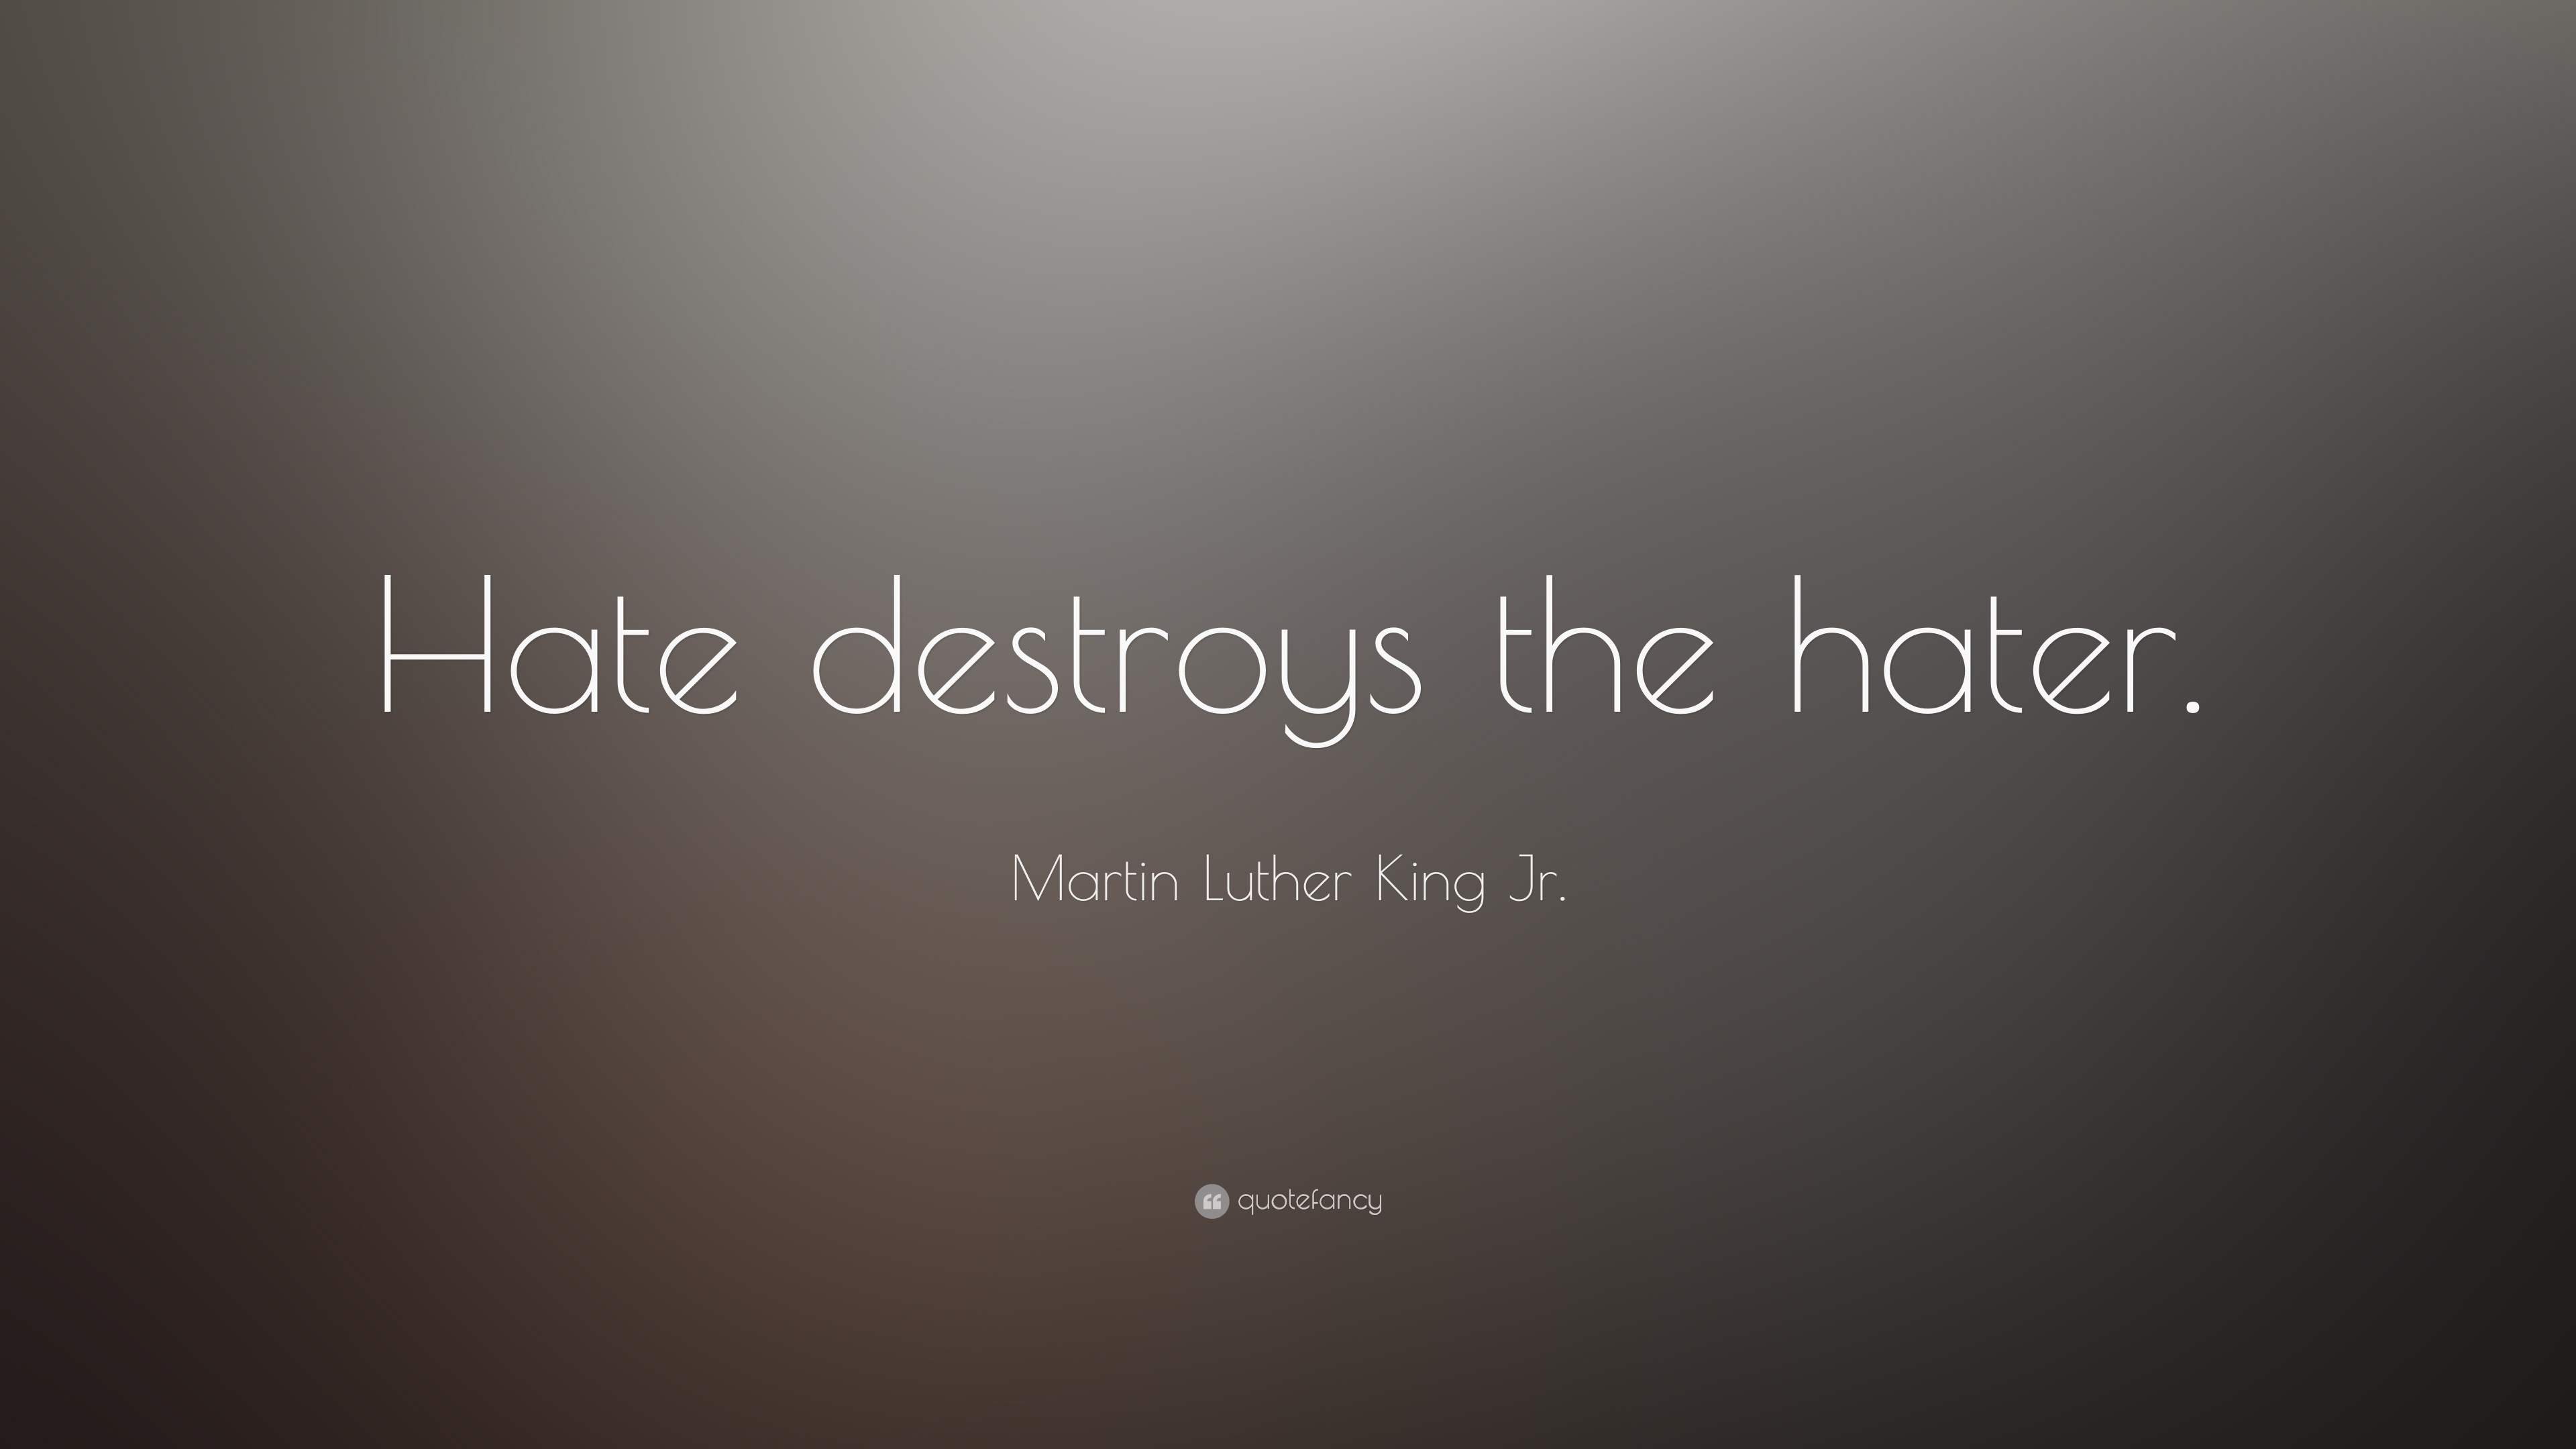 Martin Luther King Jr. Quote: “Hate destroys the hater.” (3 ...